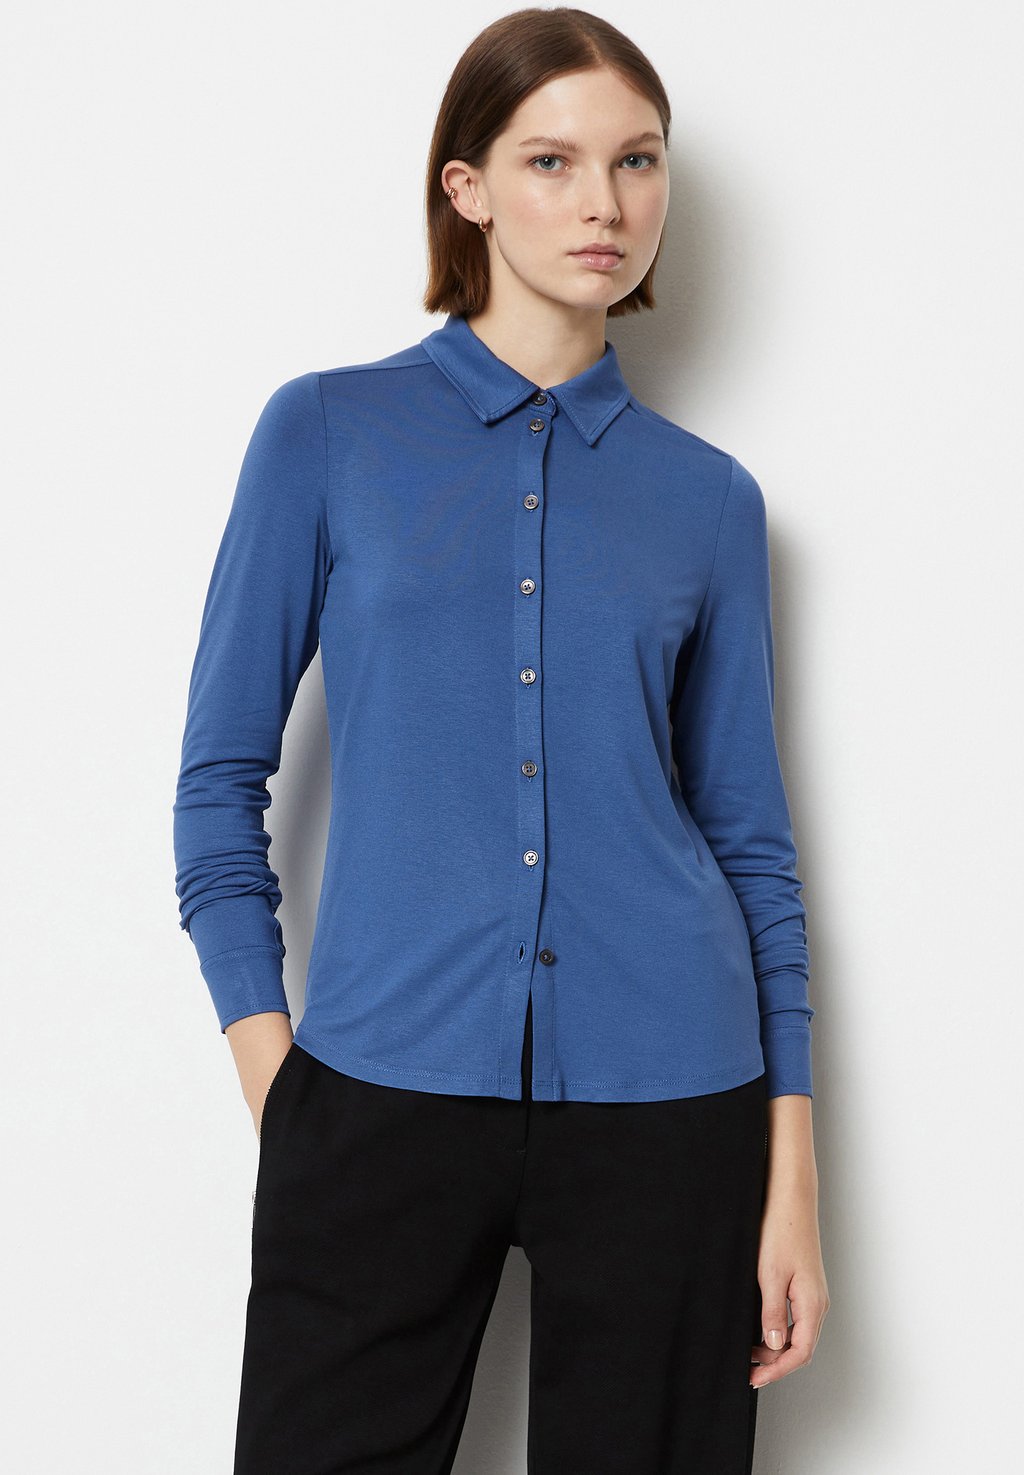 Блузка-рубашка BLOUSE LONG SLEEVE COLLAR BUTTON PLACKET Marc O'Polo, цвет spring blue fierte female large size blouse lm43010 round collar long sleeve font printing ucu parachute fabric button detail black